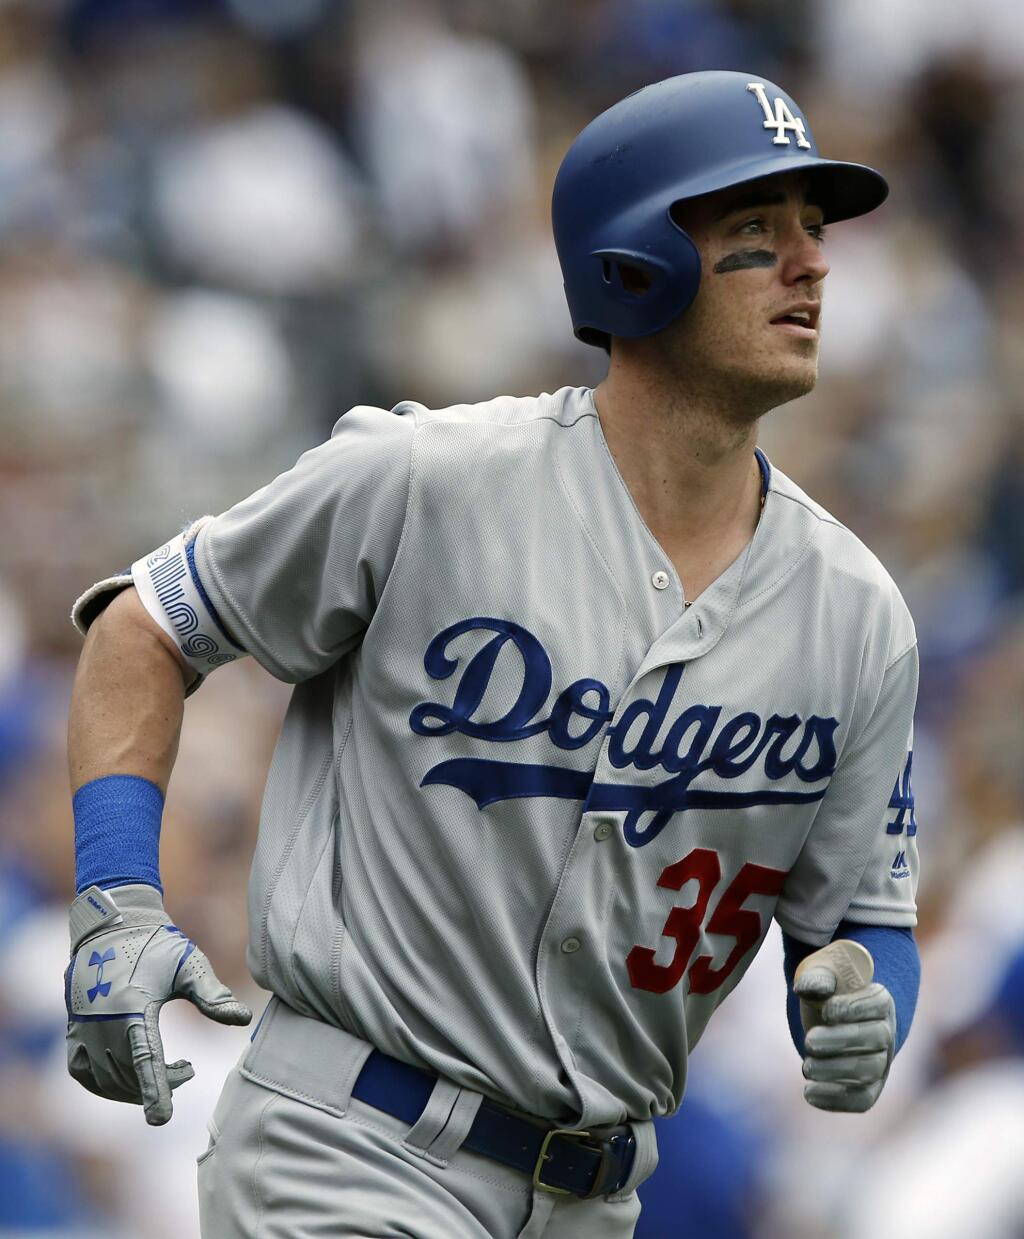 FILE - In this Sept. 3, 2017, file photo, Los Angeles Dodgers' Cody Bellinger watches his solo home run during the ninth inning of a baseball game against the San Diego Padres, in San Diego. Aaron Judge of the Yankees and Cody Bellinger of the Dodgers are favored to win Rookie of the Year honors when the votes are announced Monday night, Nov. 13, 2017. (AP Photo/Alex Gallardo, File)